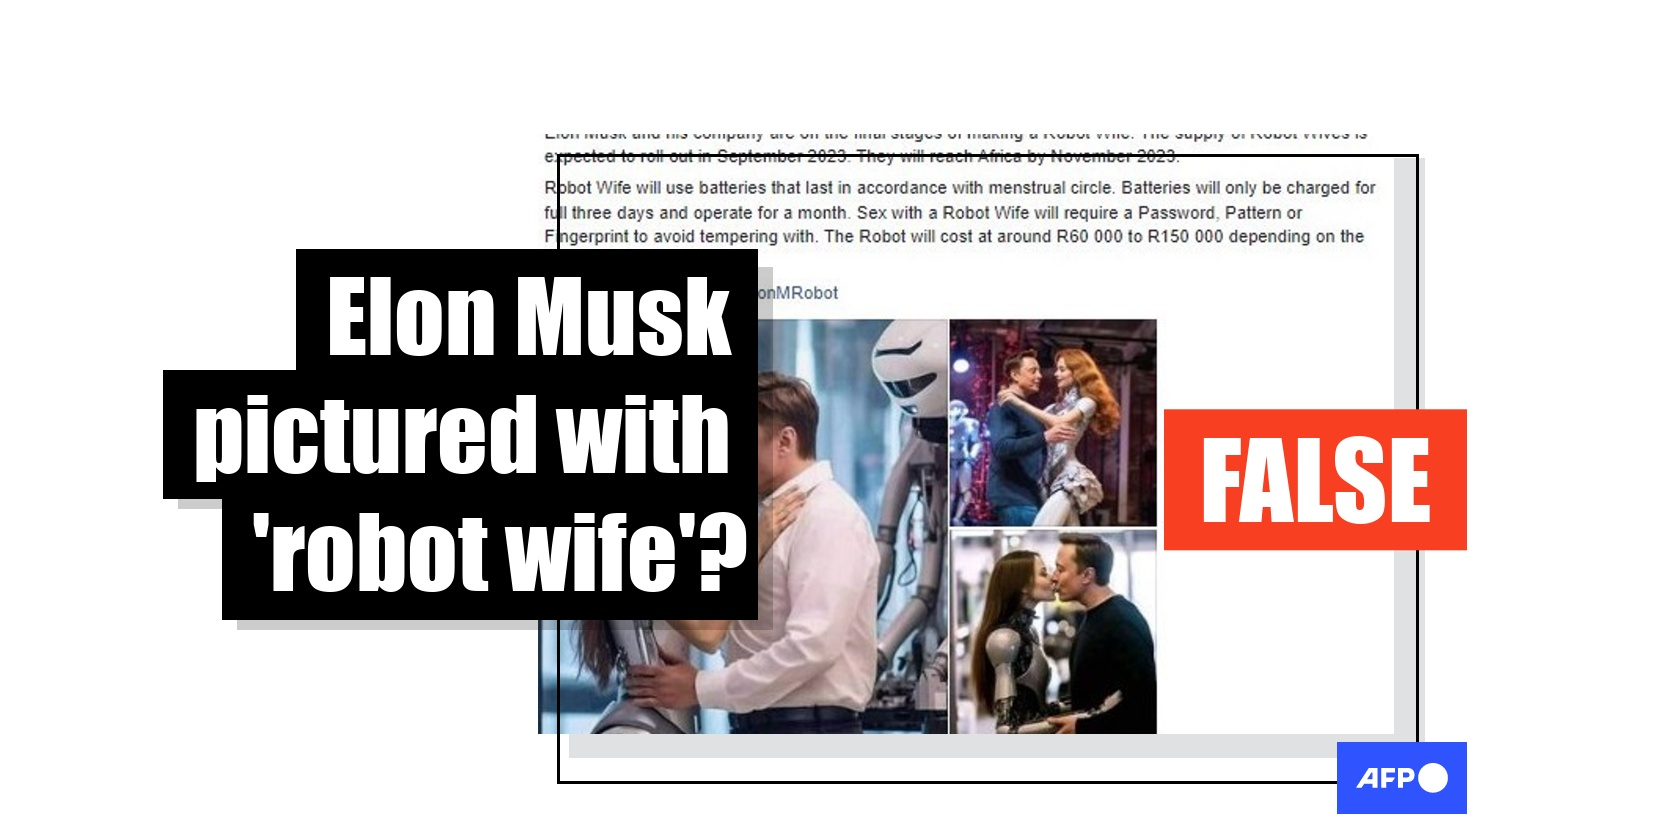 Computer-generated image does not show Elon Musk with robot wife Fact Check pic